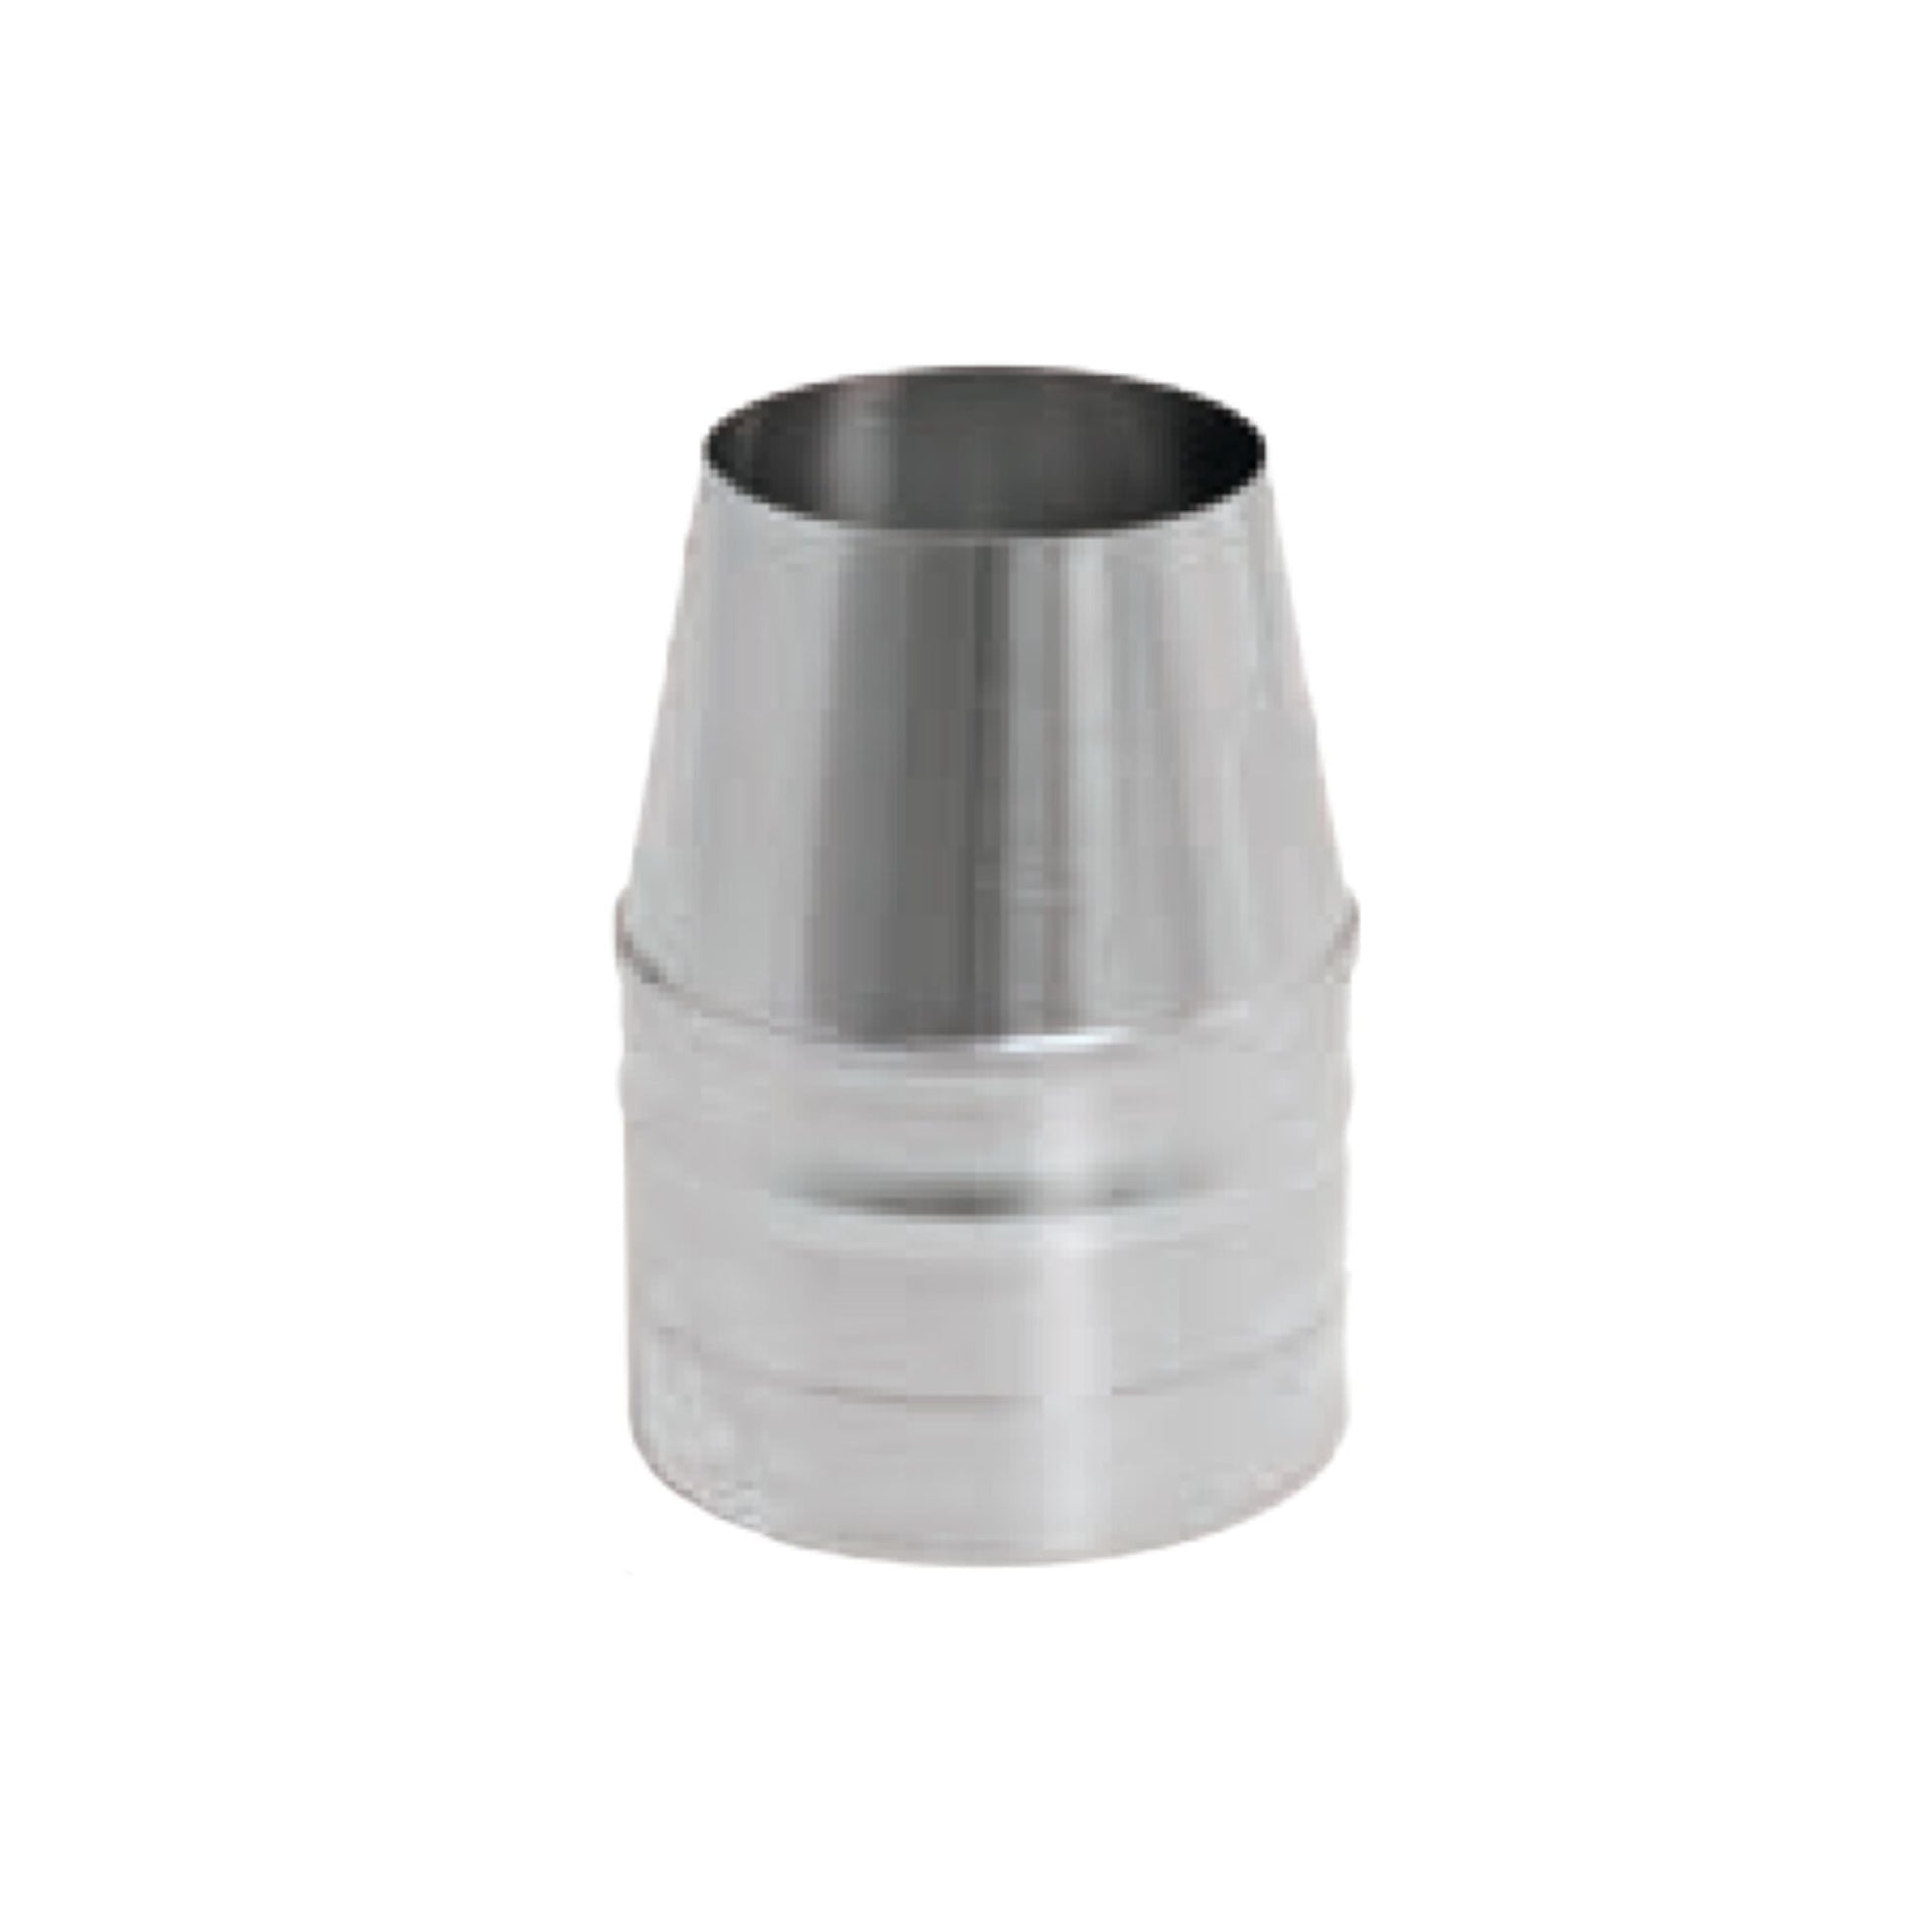 DuraVent FasNSeal 10" x 5" 29-4C Stainless Steel Termination Cone